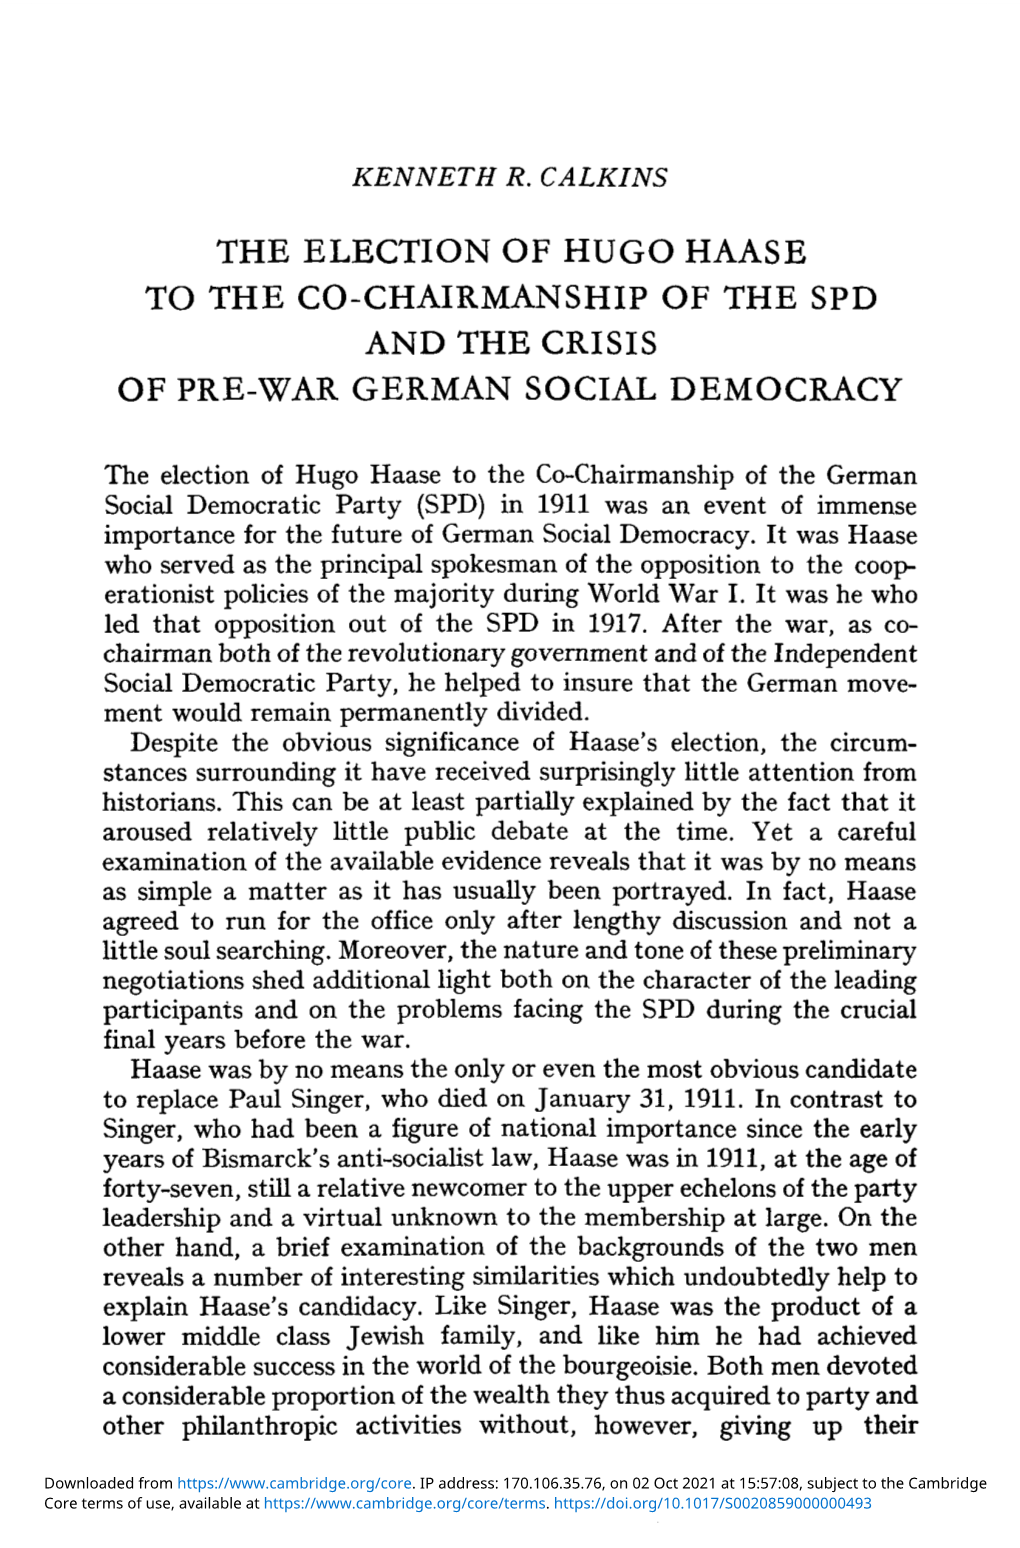 The Election of Hugo Haase to the Co-Chairmanship of the Spd and the Crisis of Pre-War German Social Democracy